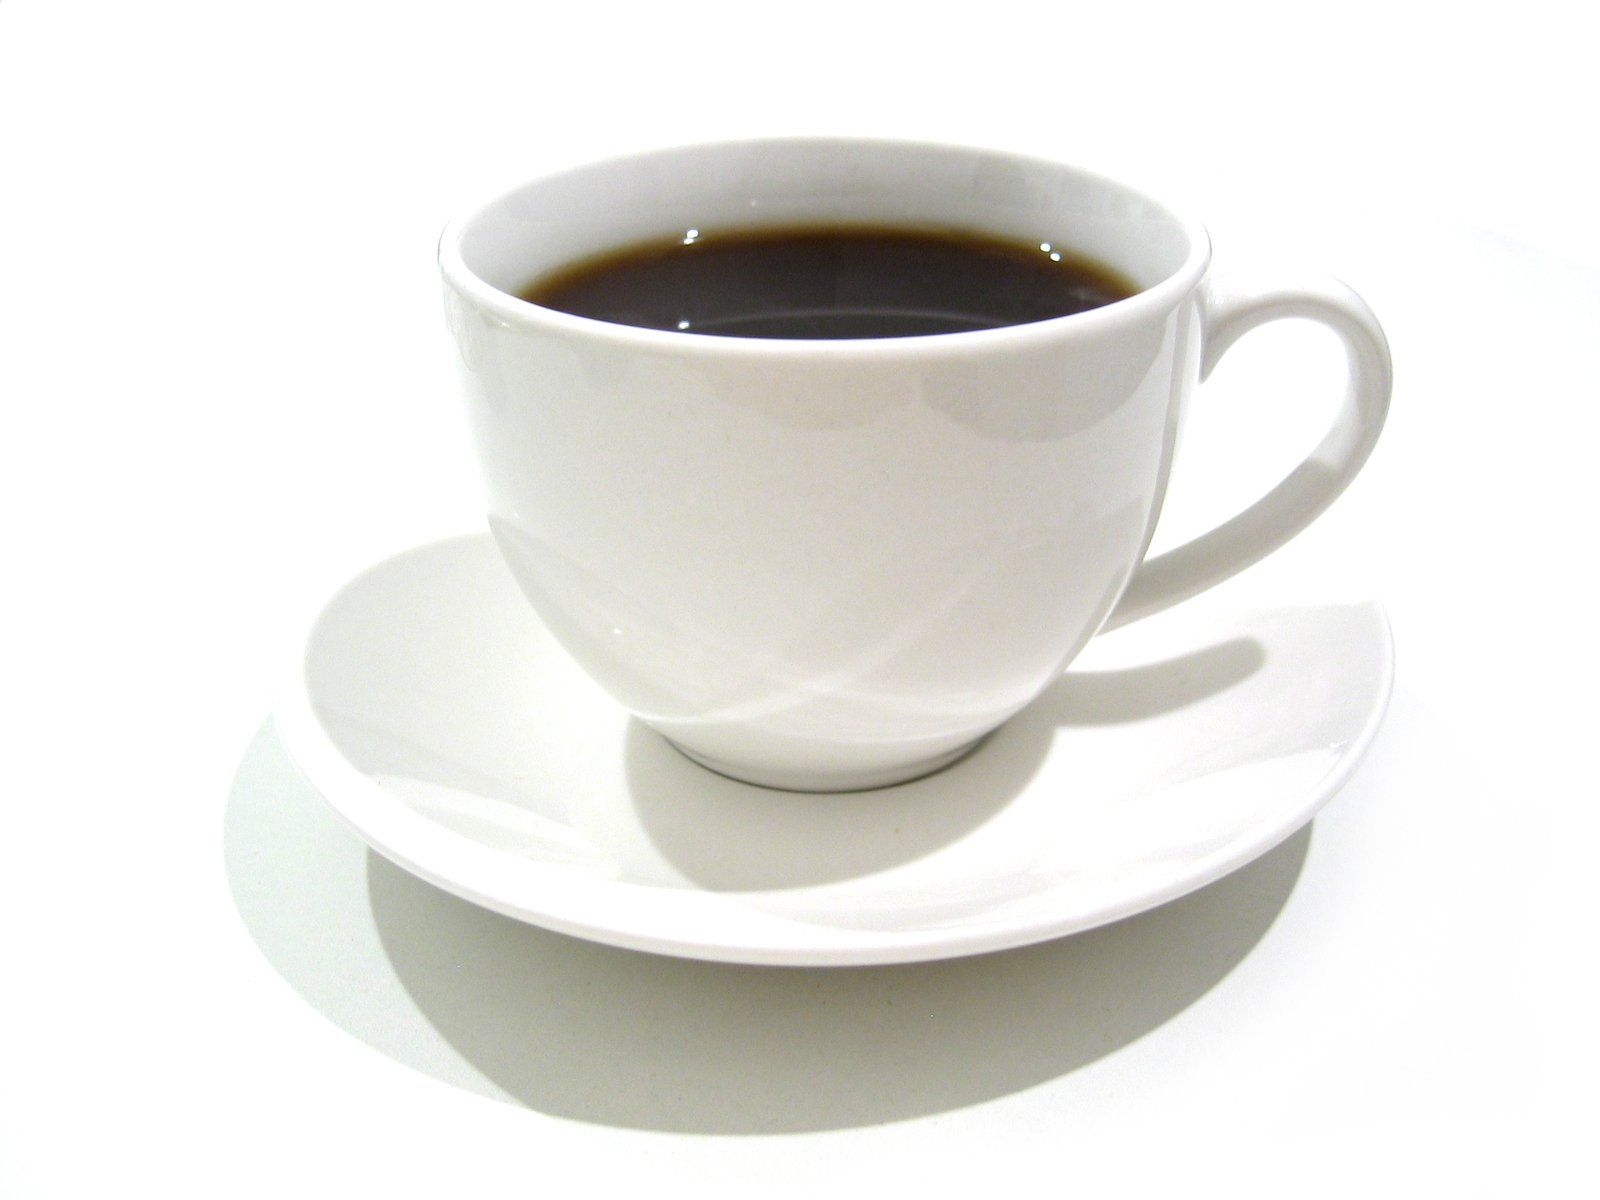 an empty coffee cup and saucer on a white background